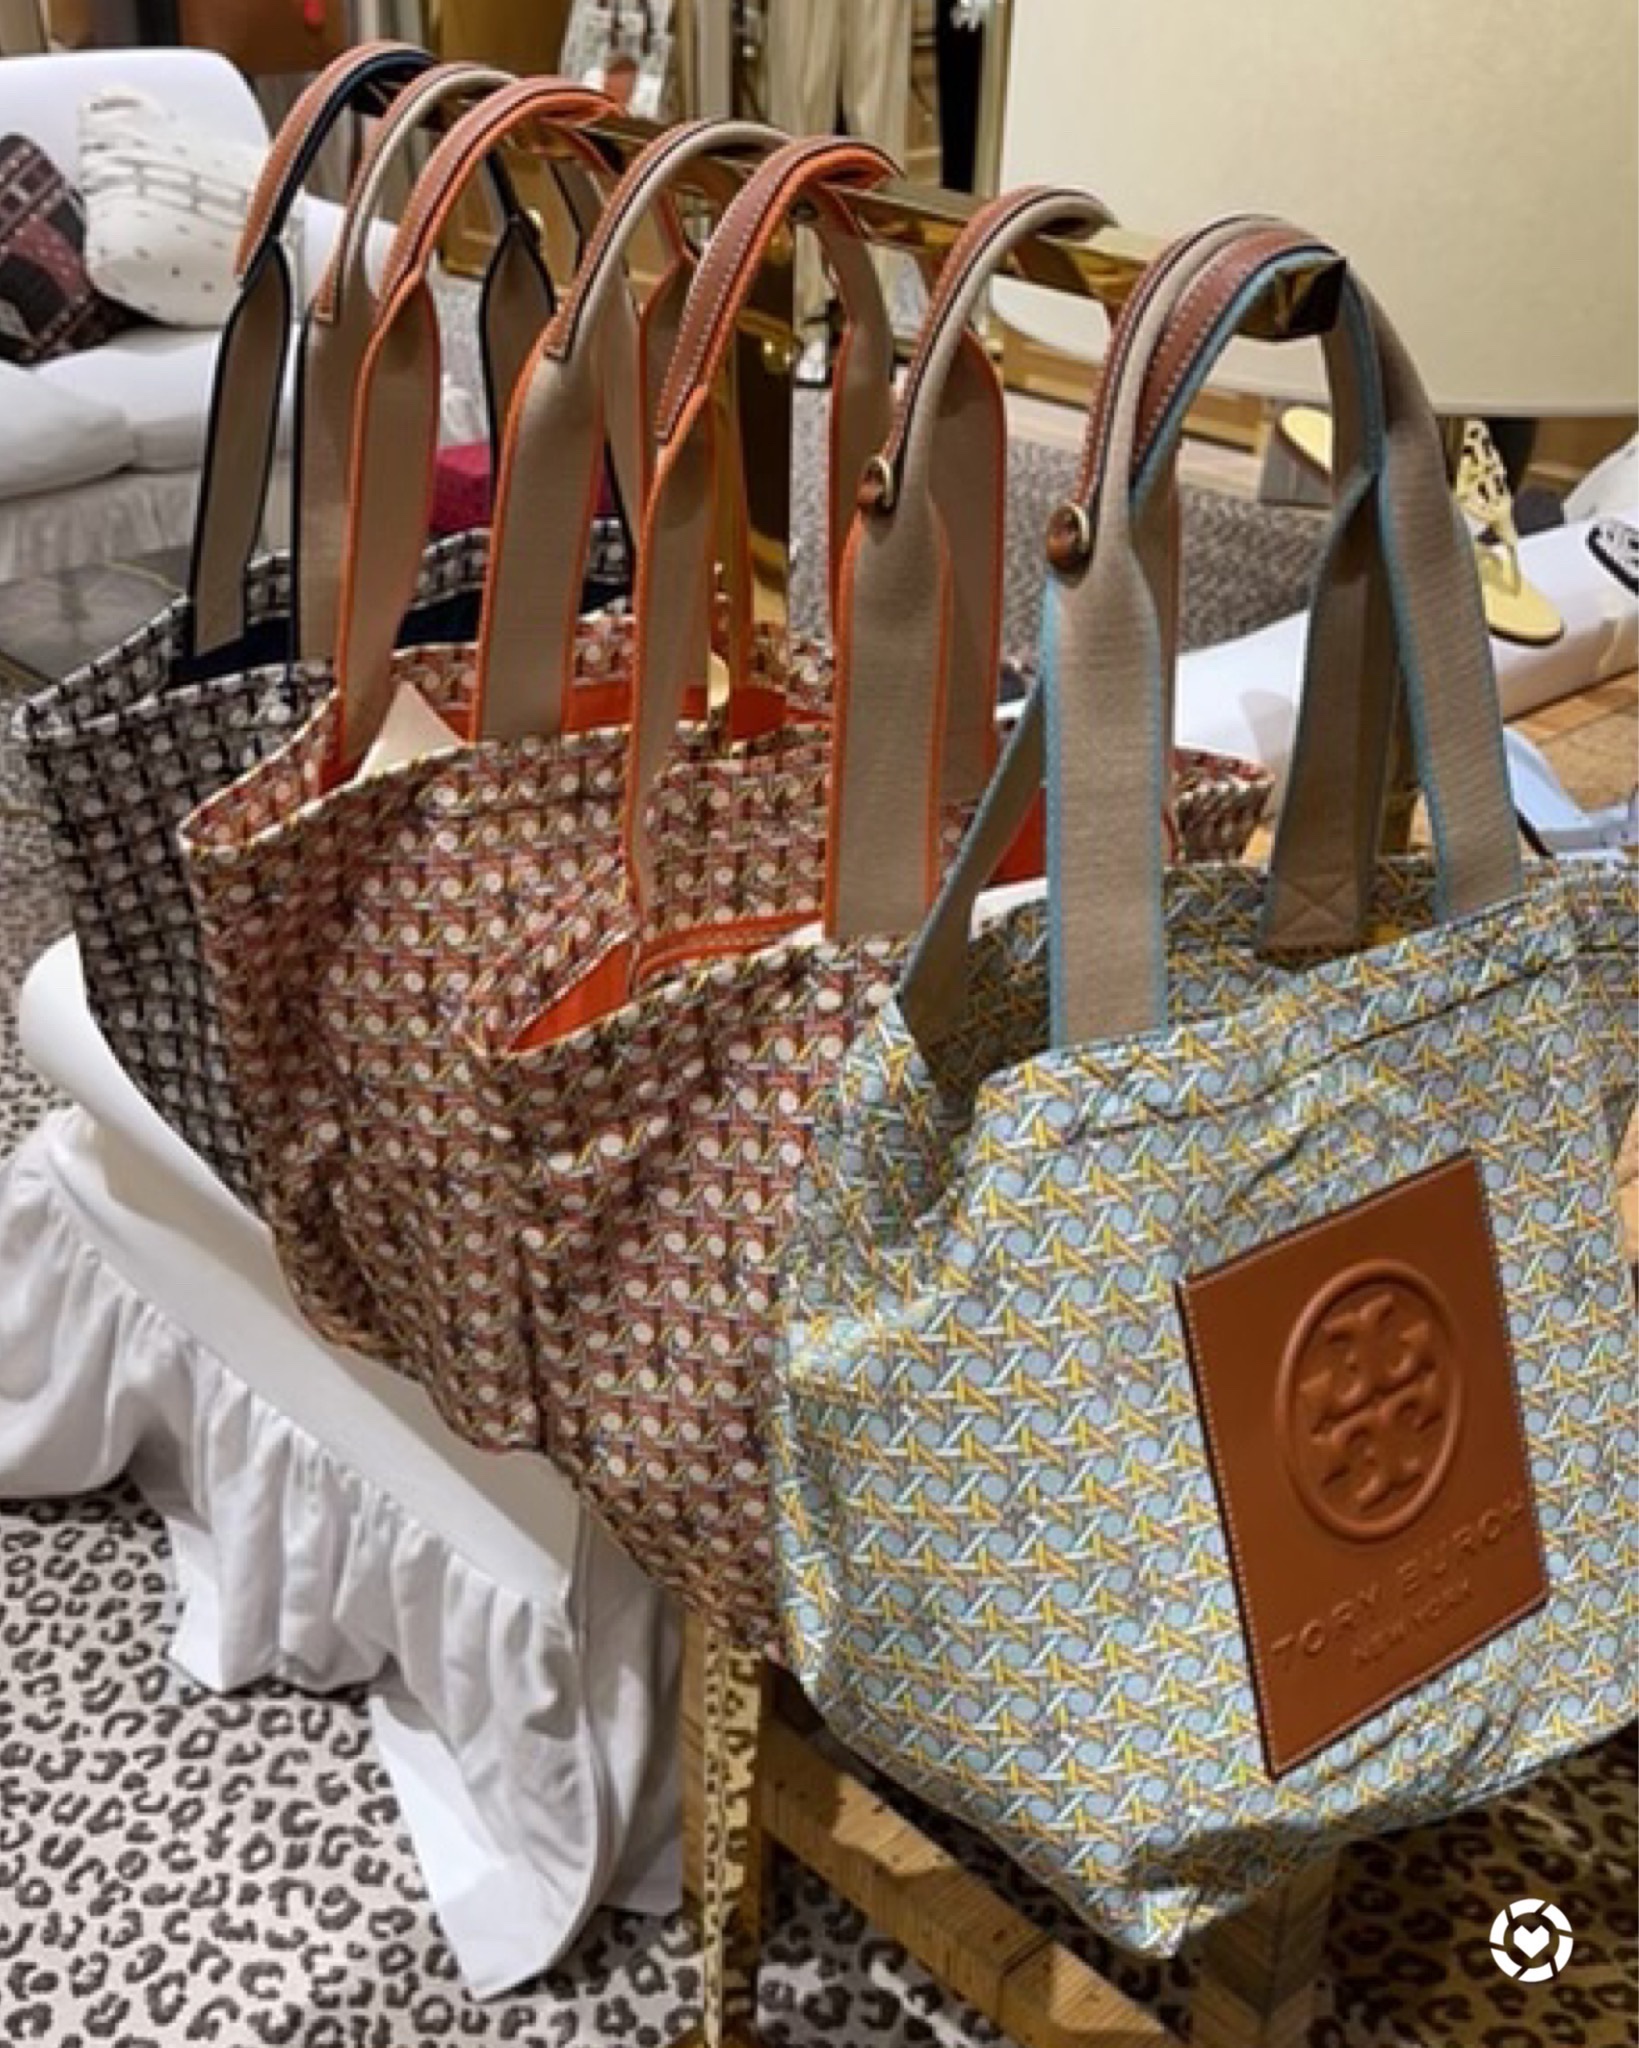 Tory Burch Spring Event 2021  Save Up To 30% Off! - The Double Take Girls